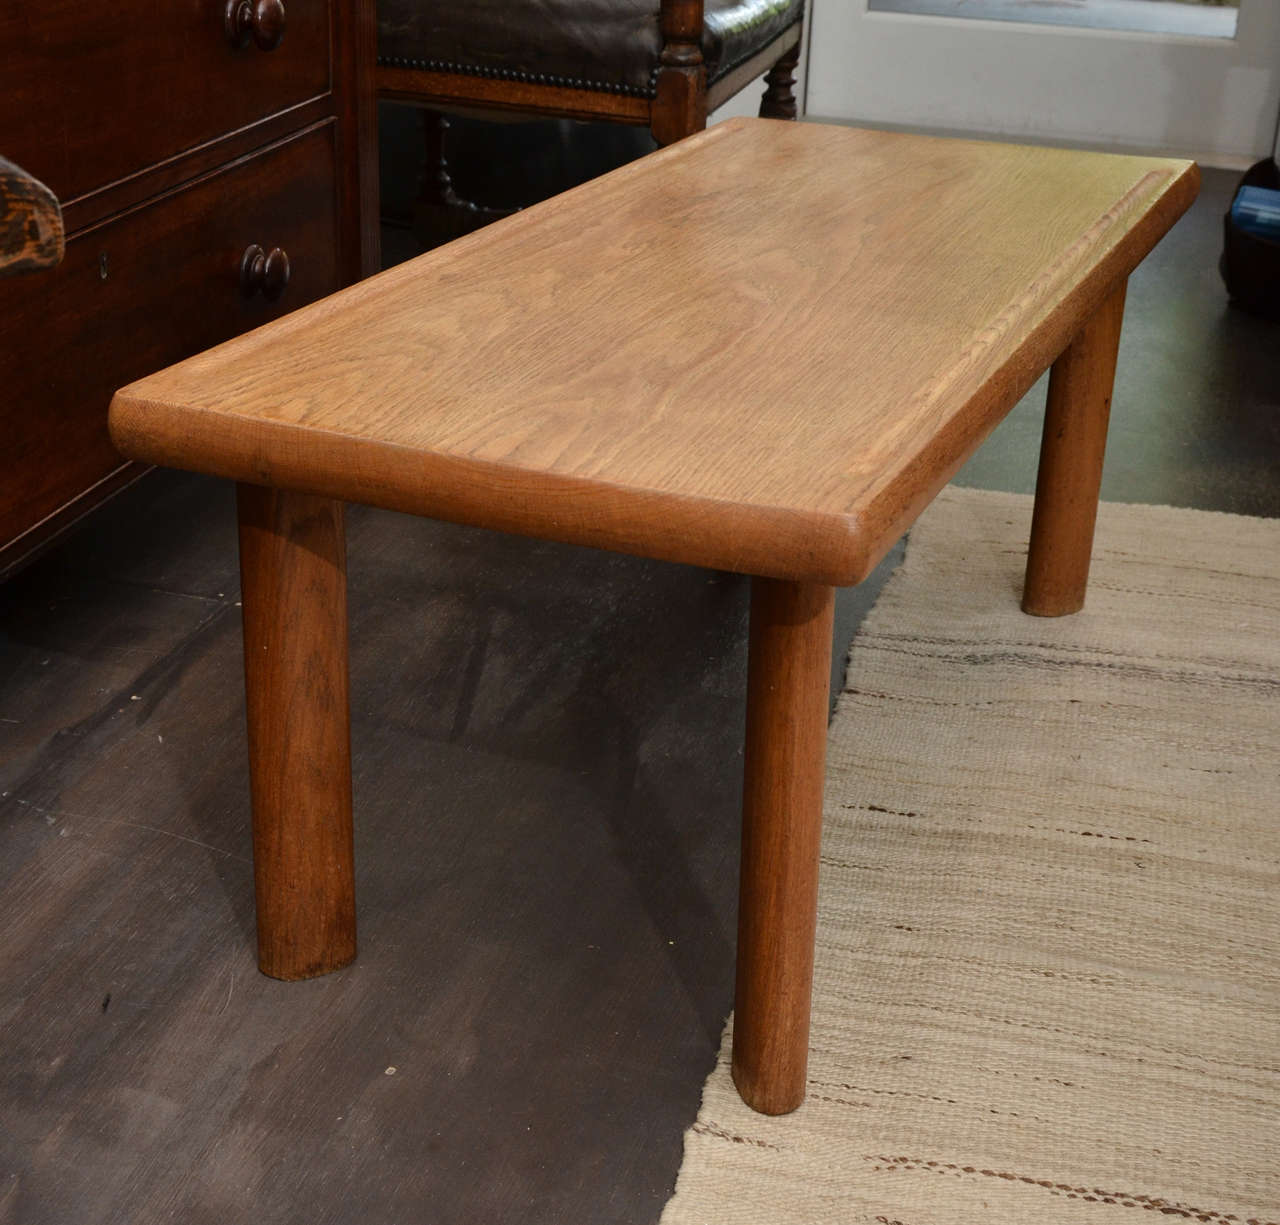 Beautiful and simple oak bench or coffee table with curved and slanted leg detail that is in the manner of Perriand.